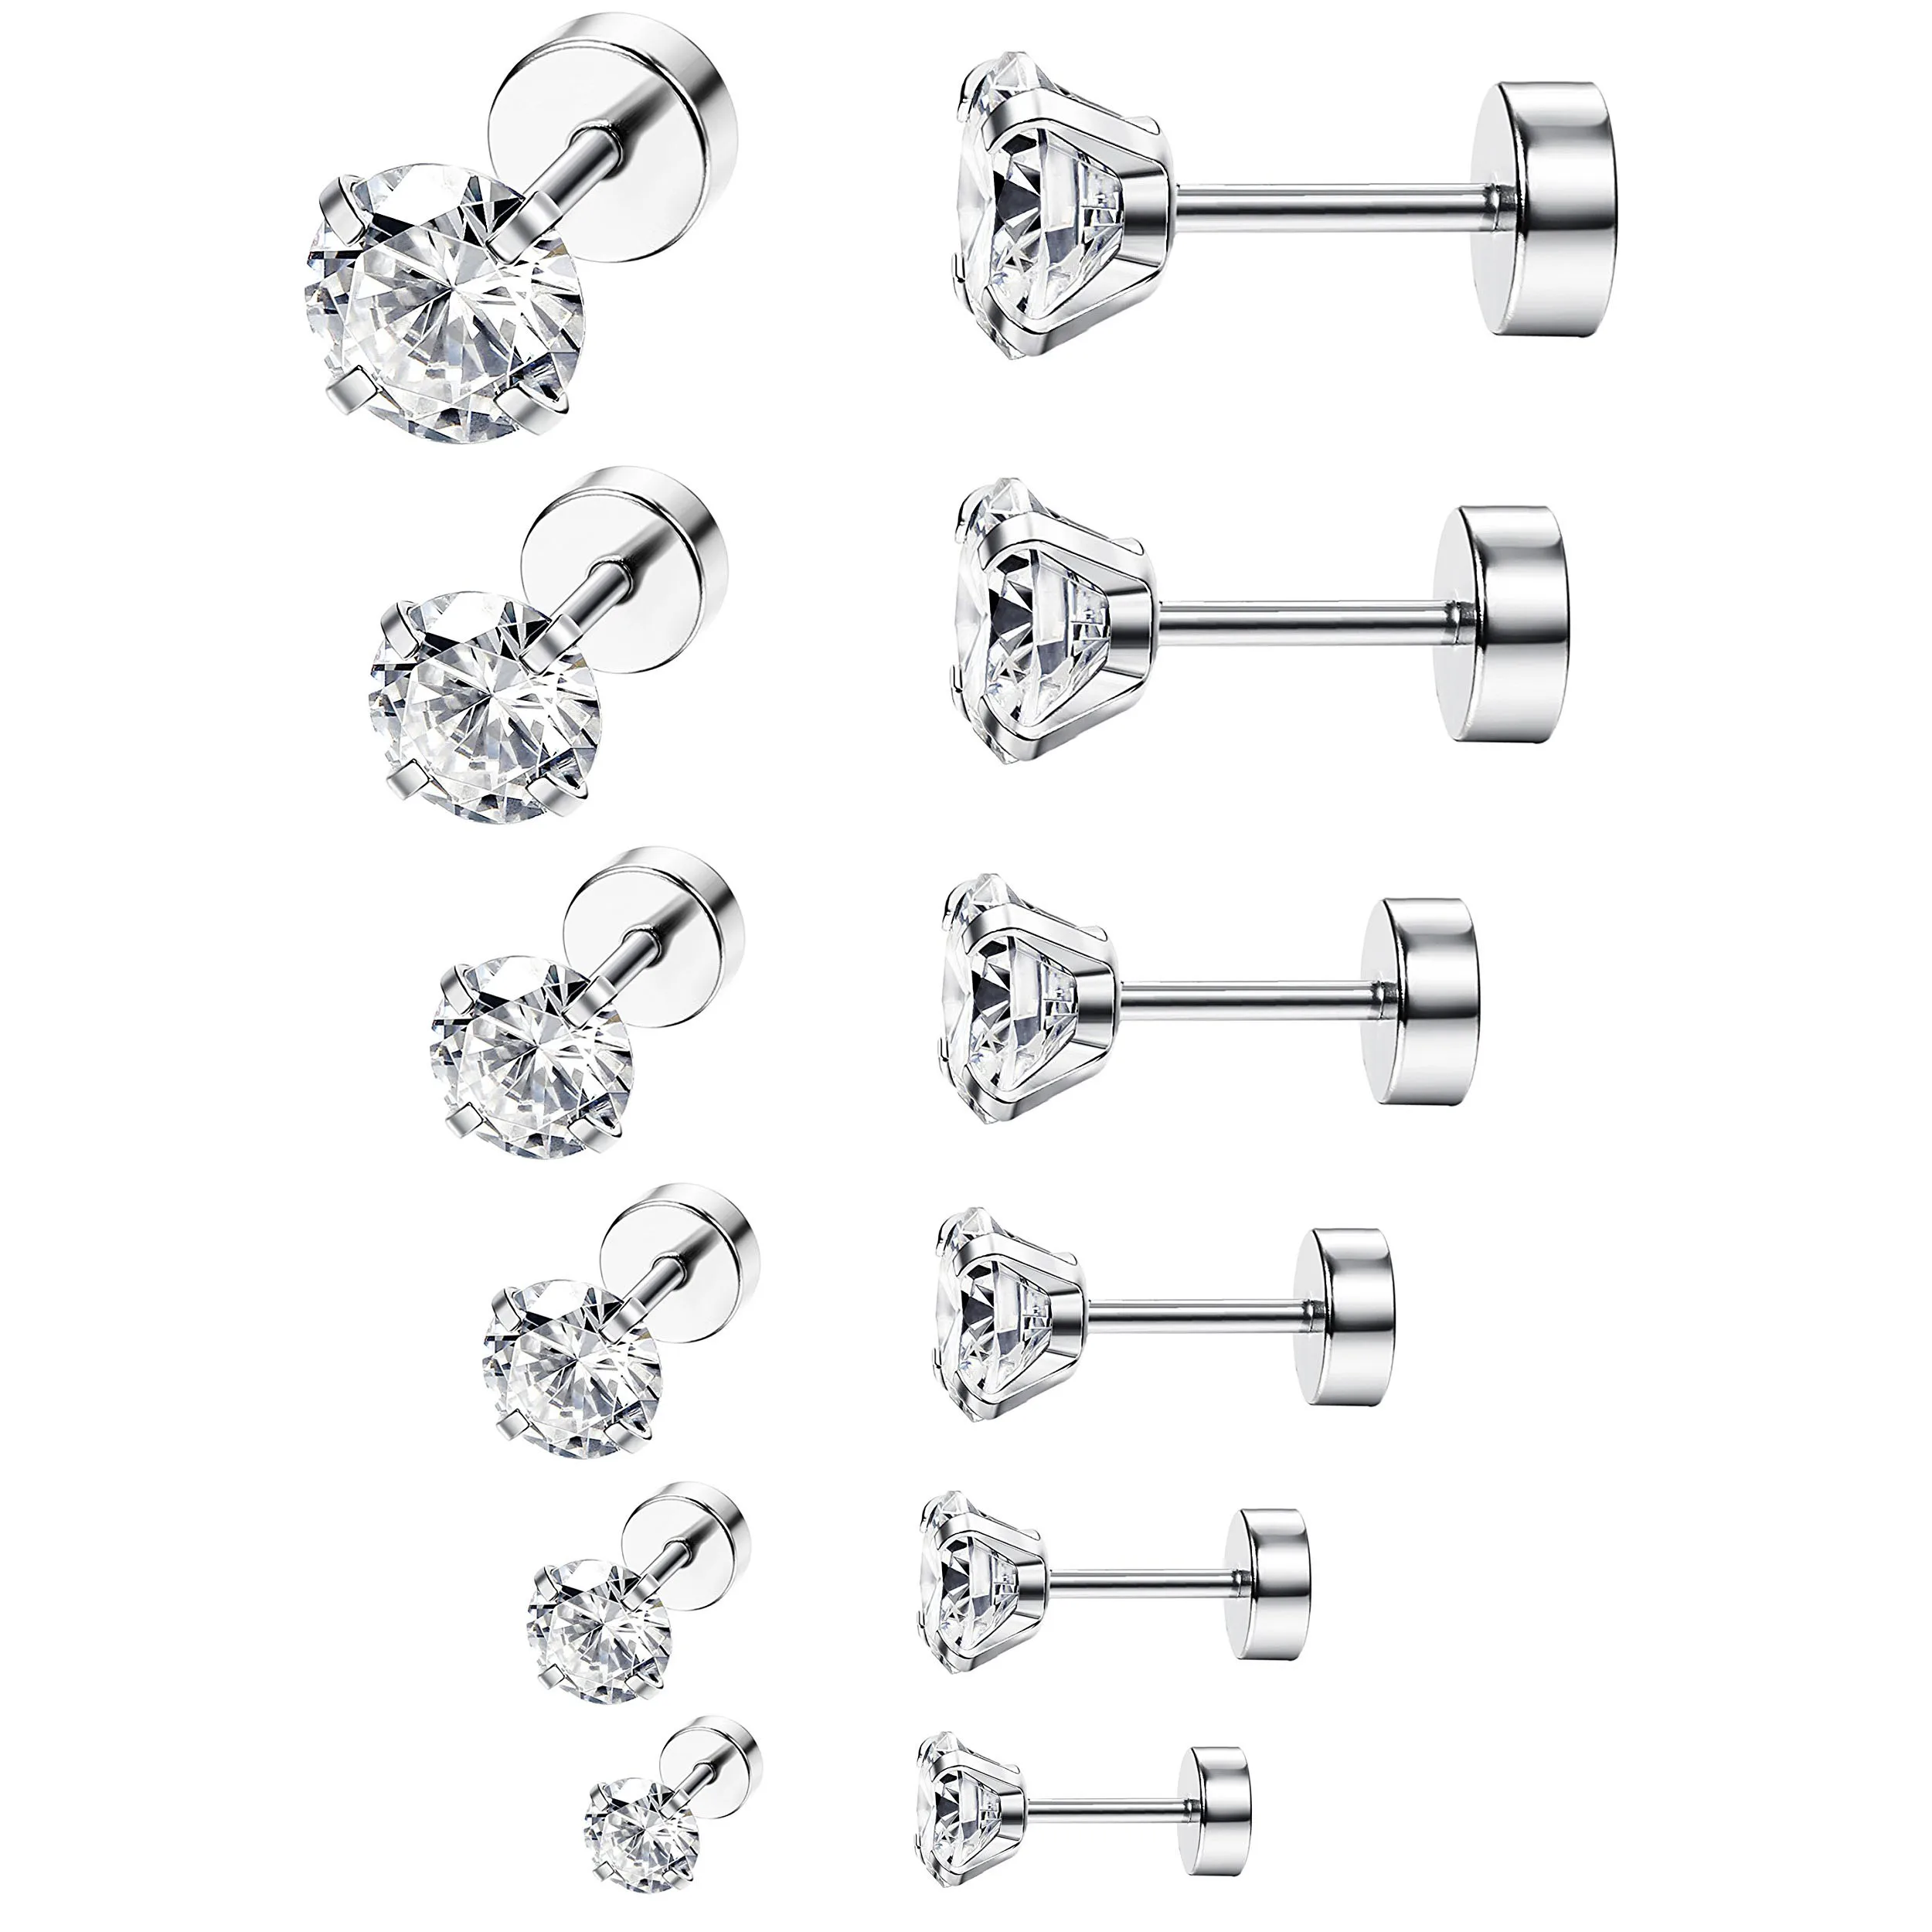 

6 Pairs 18G Stainless Steel Ear Stud Piercing Barbell Studs Earrings Set Round Cubic Zirconia Inlaid Steel Size 2/4/5/6/8/10MM